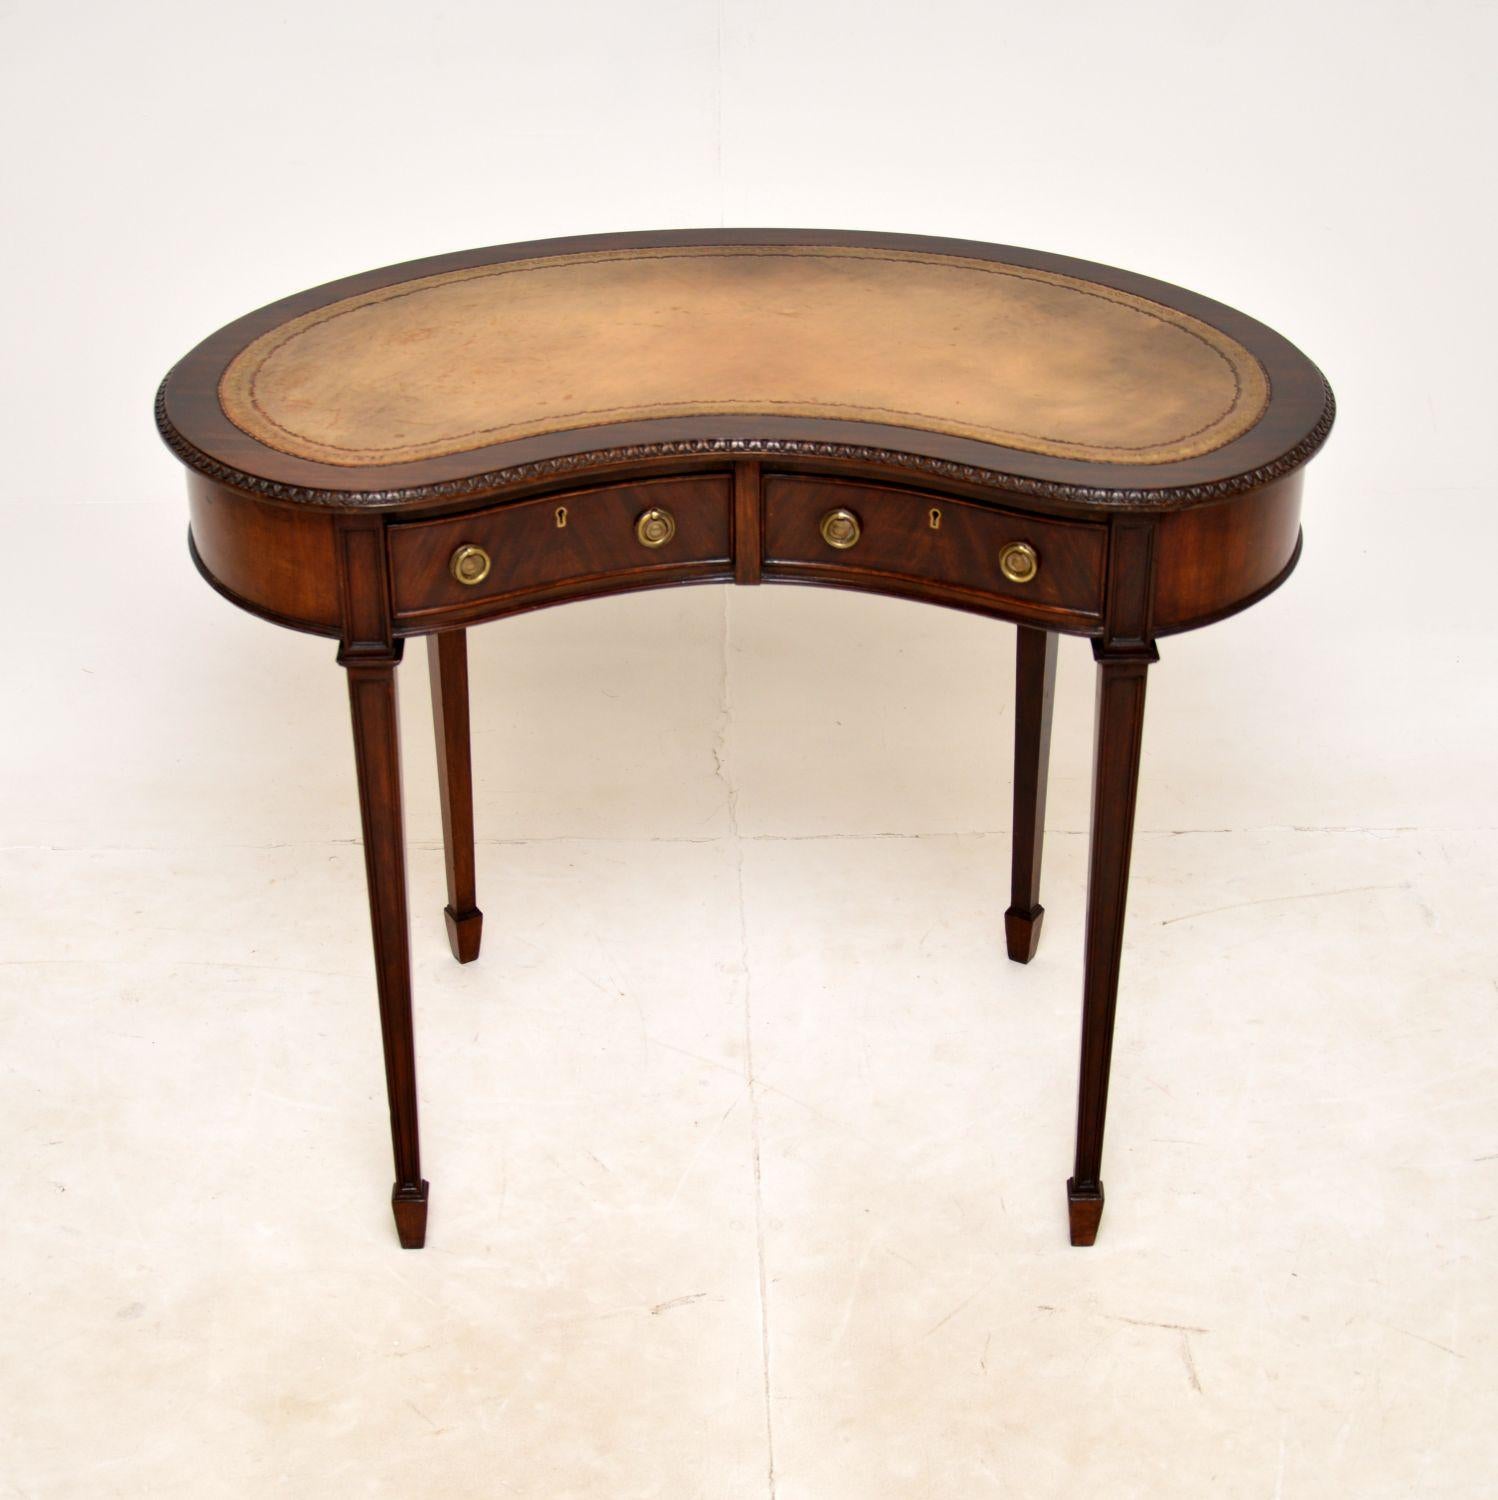 A superb antique Edwardian kidney shaped desk. This was made in England, it dates from around 1900-1910.

The quality is outstanding, this sits on beautifully tapered legs terminating in spade end feet. The kidney shaped top has lovely carving